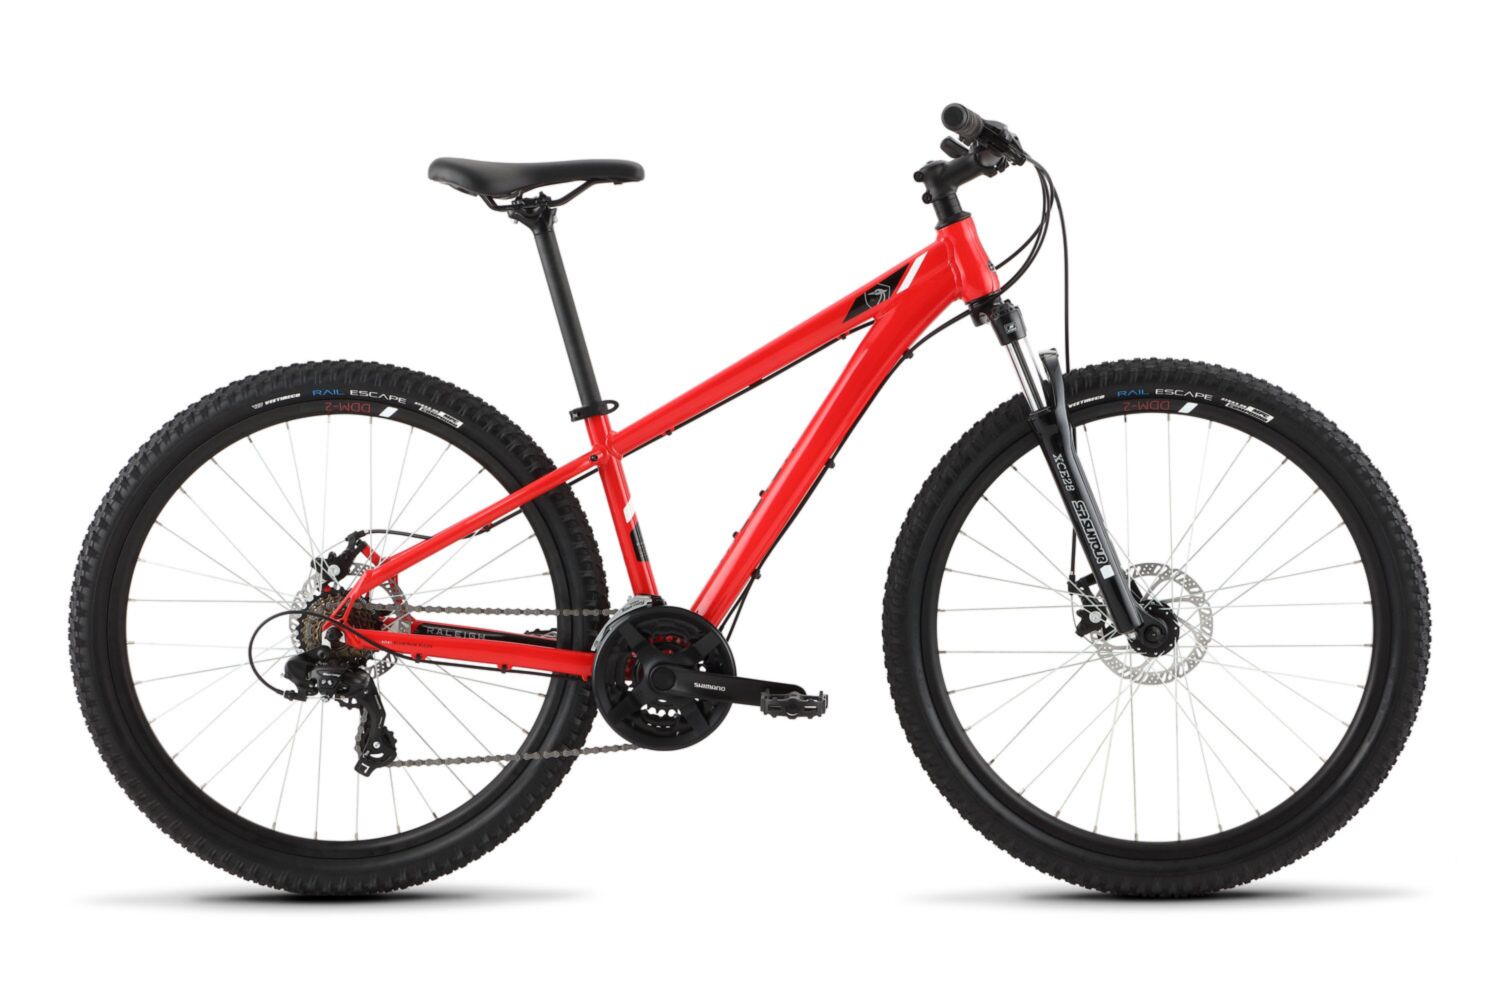 raleigh mountain bicycles